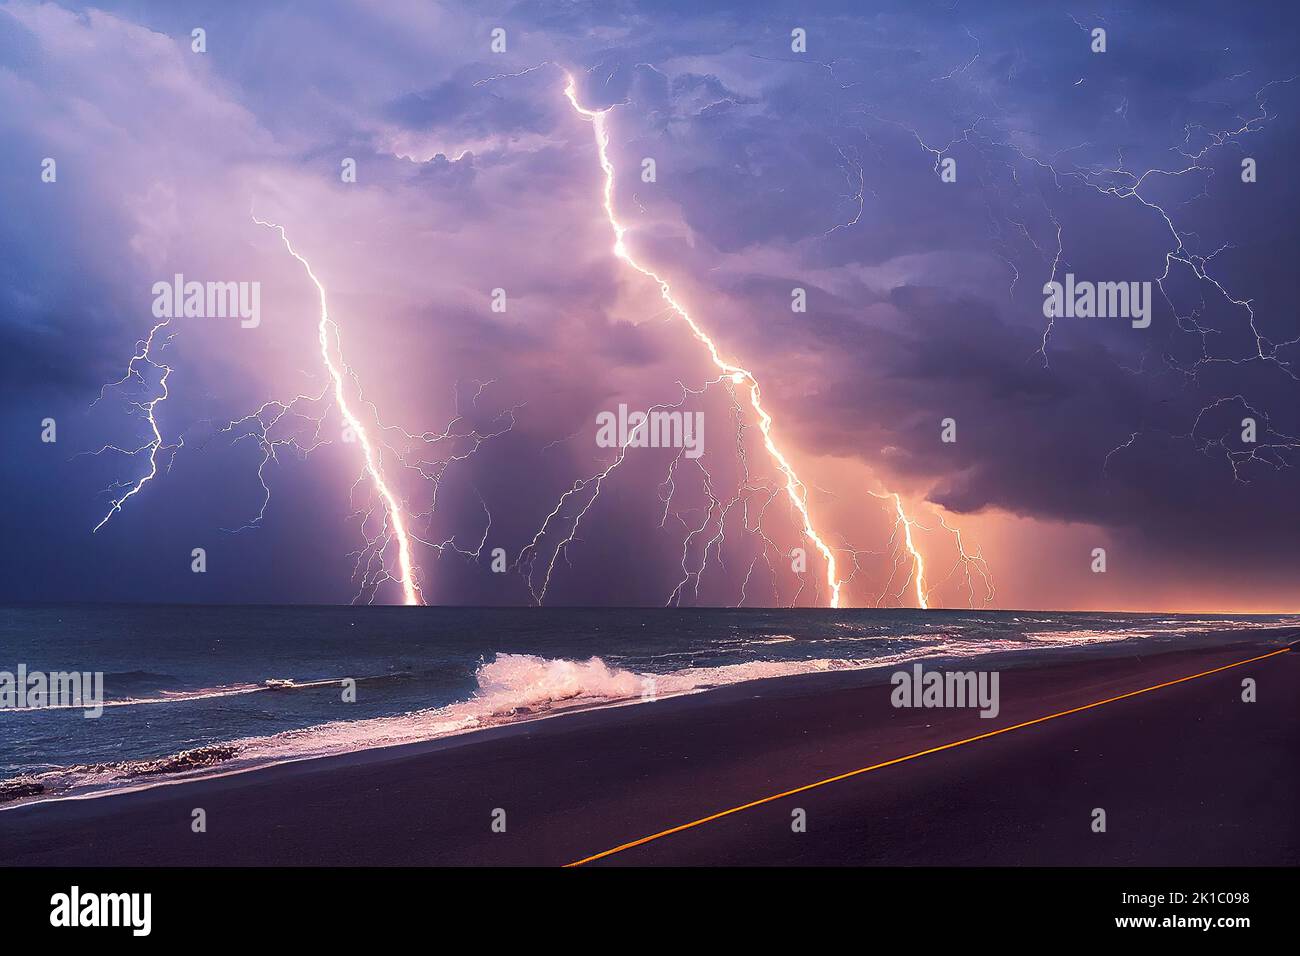 A storm with dangerous lightning strikes in a cloudy sky and stormy ocean is pictured in a natural disaster caused by climate change. 3D illustration Stock Photo